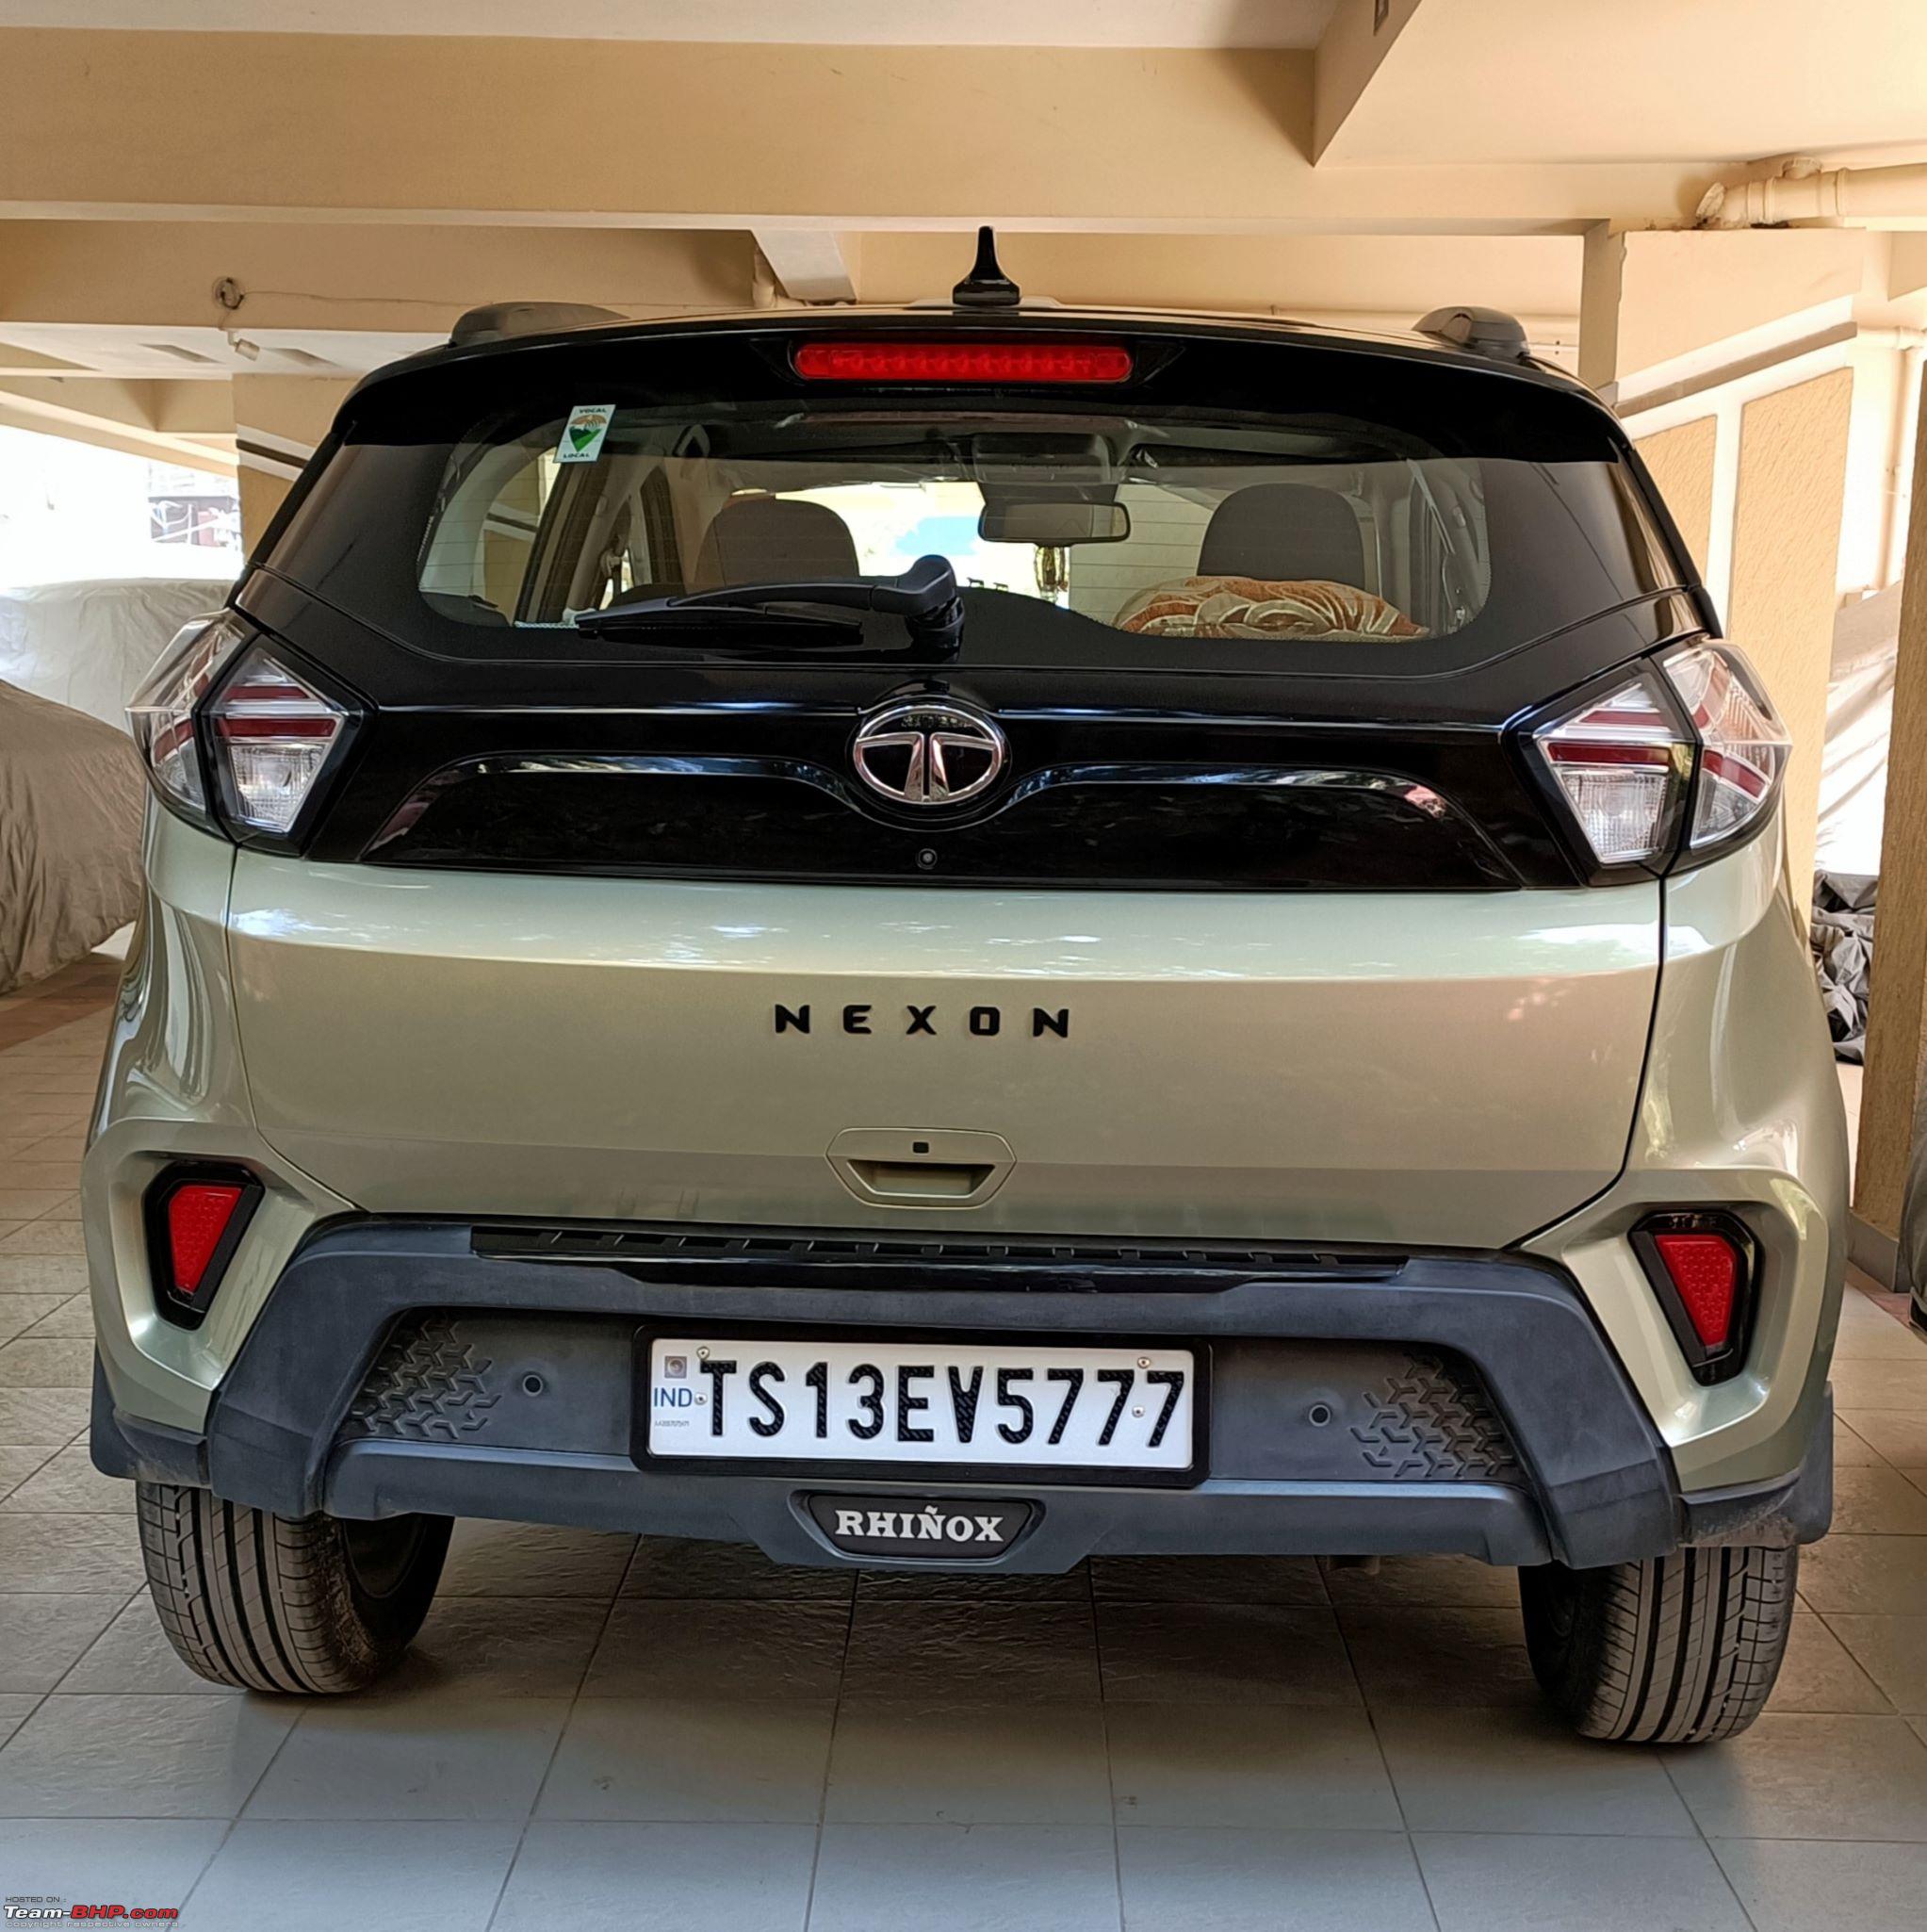 Tata Nexon : Official Review - Page 340 - Team-BHP